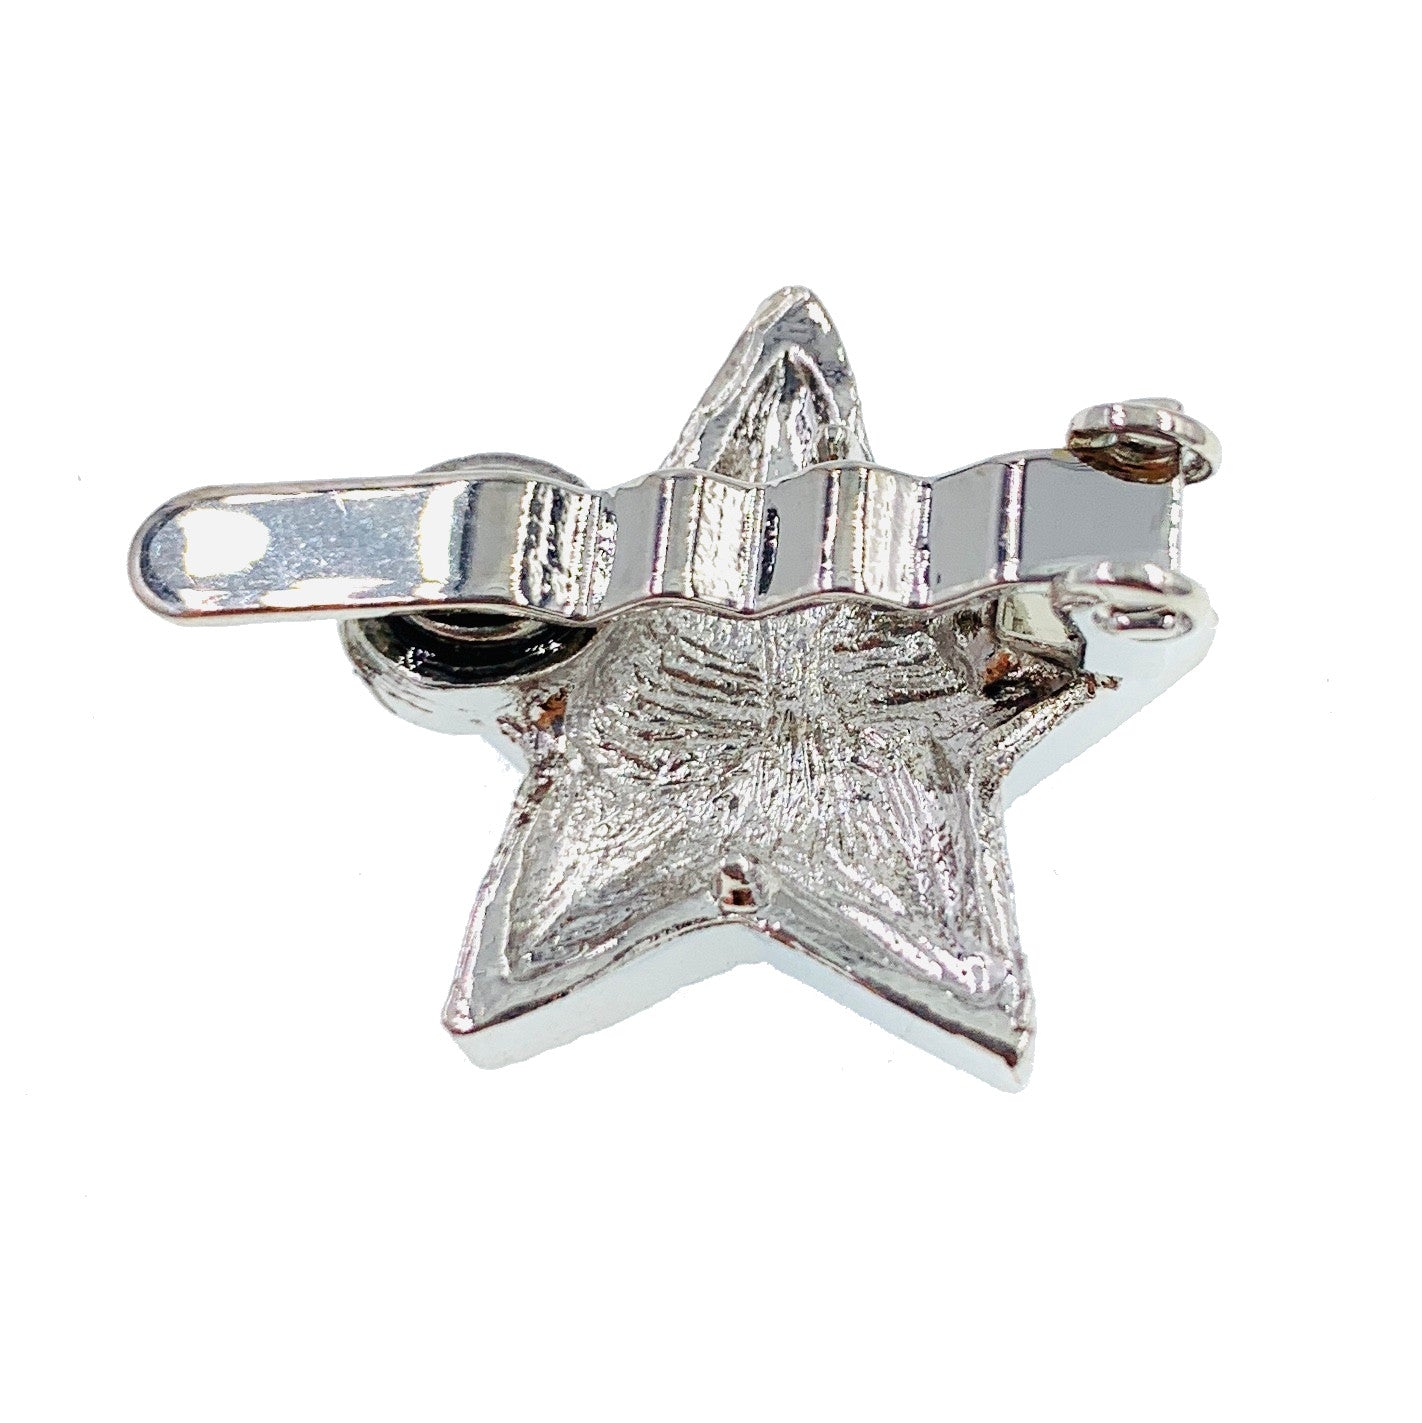 Calypso Star Magnetic Hair Clip Rhinestone Crystal  Hairpin Small Barrette, Magnetic Clip - MOGHANT